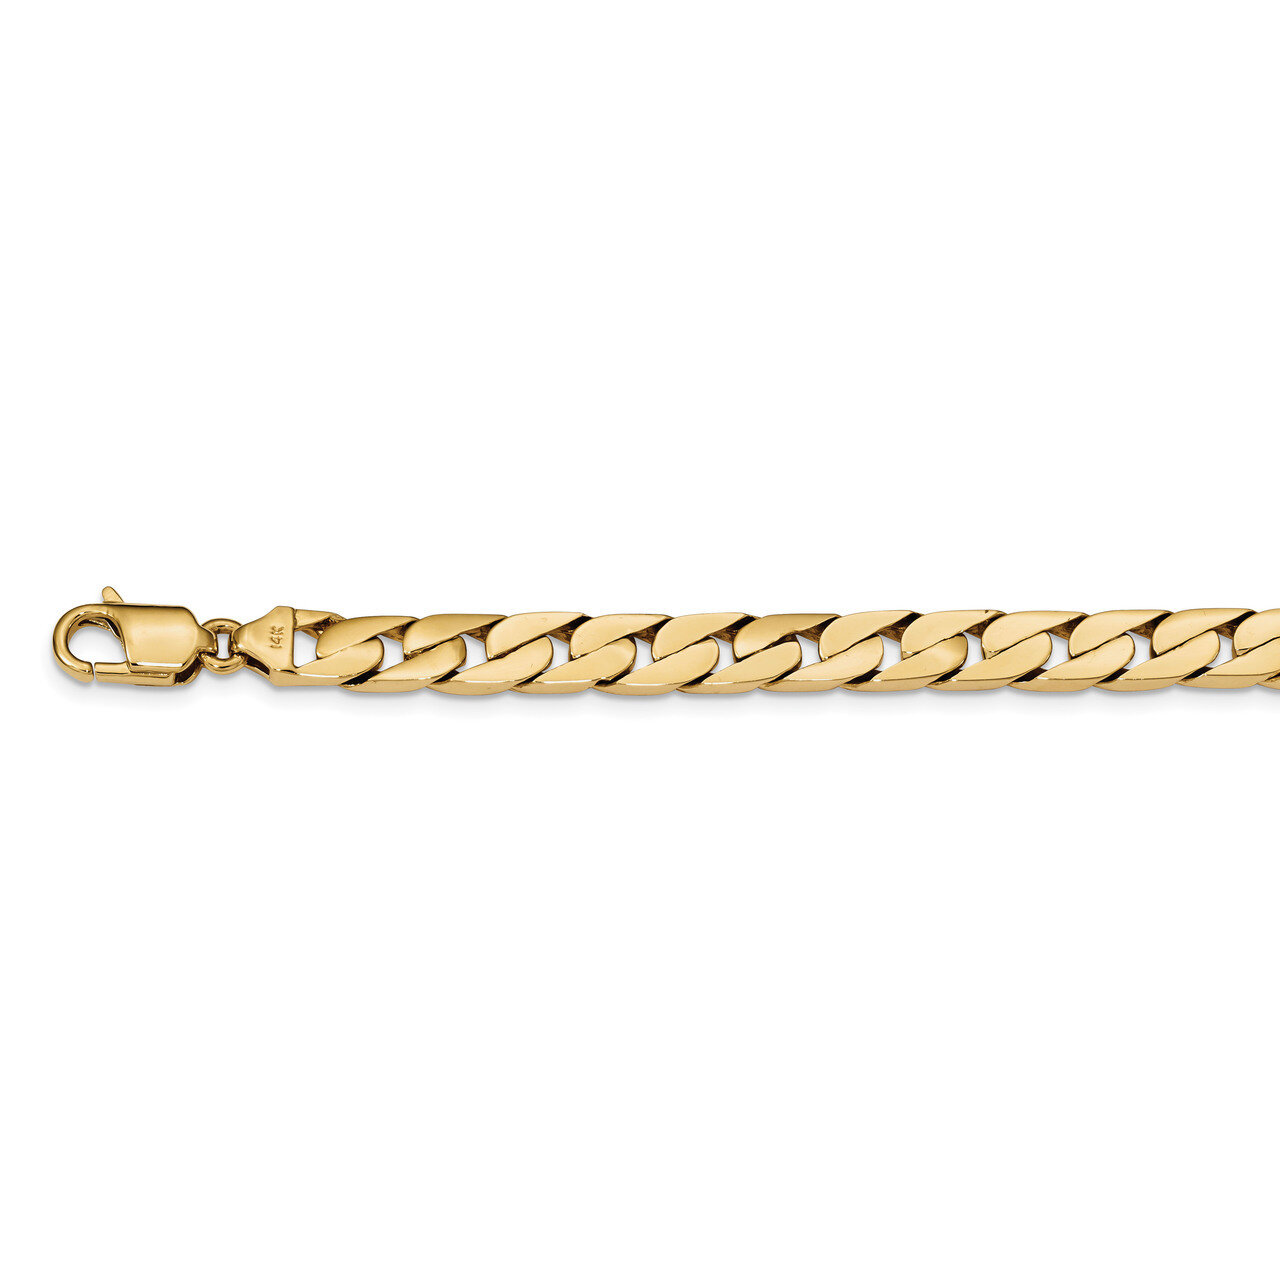 8 Inch 8.00mm Hand-polished Long Link Half Round Curb Chain 14k Gold LK589-8